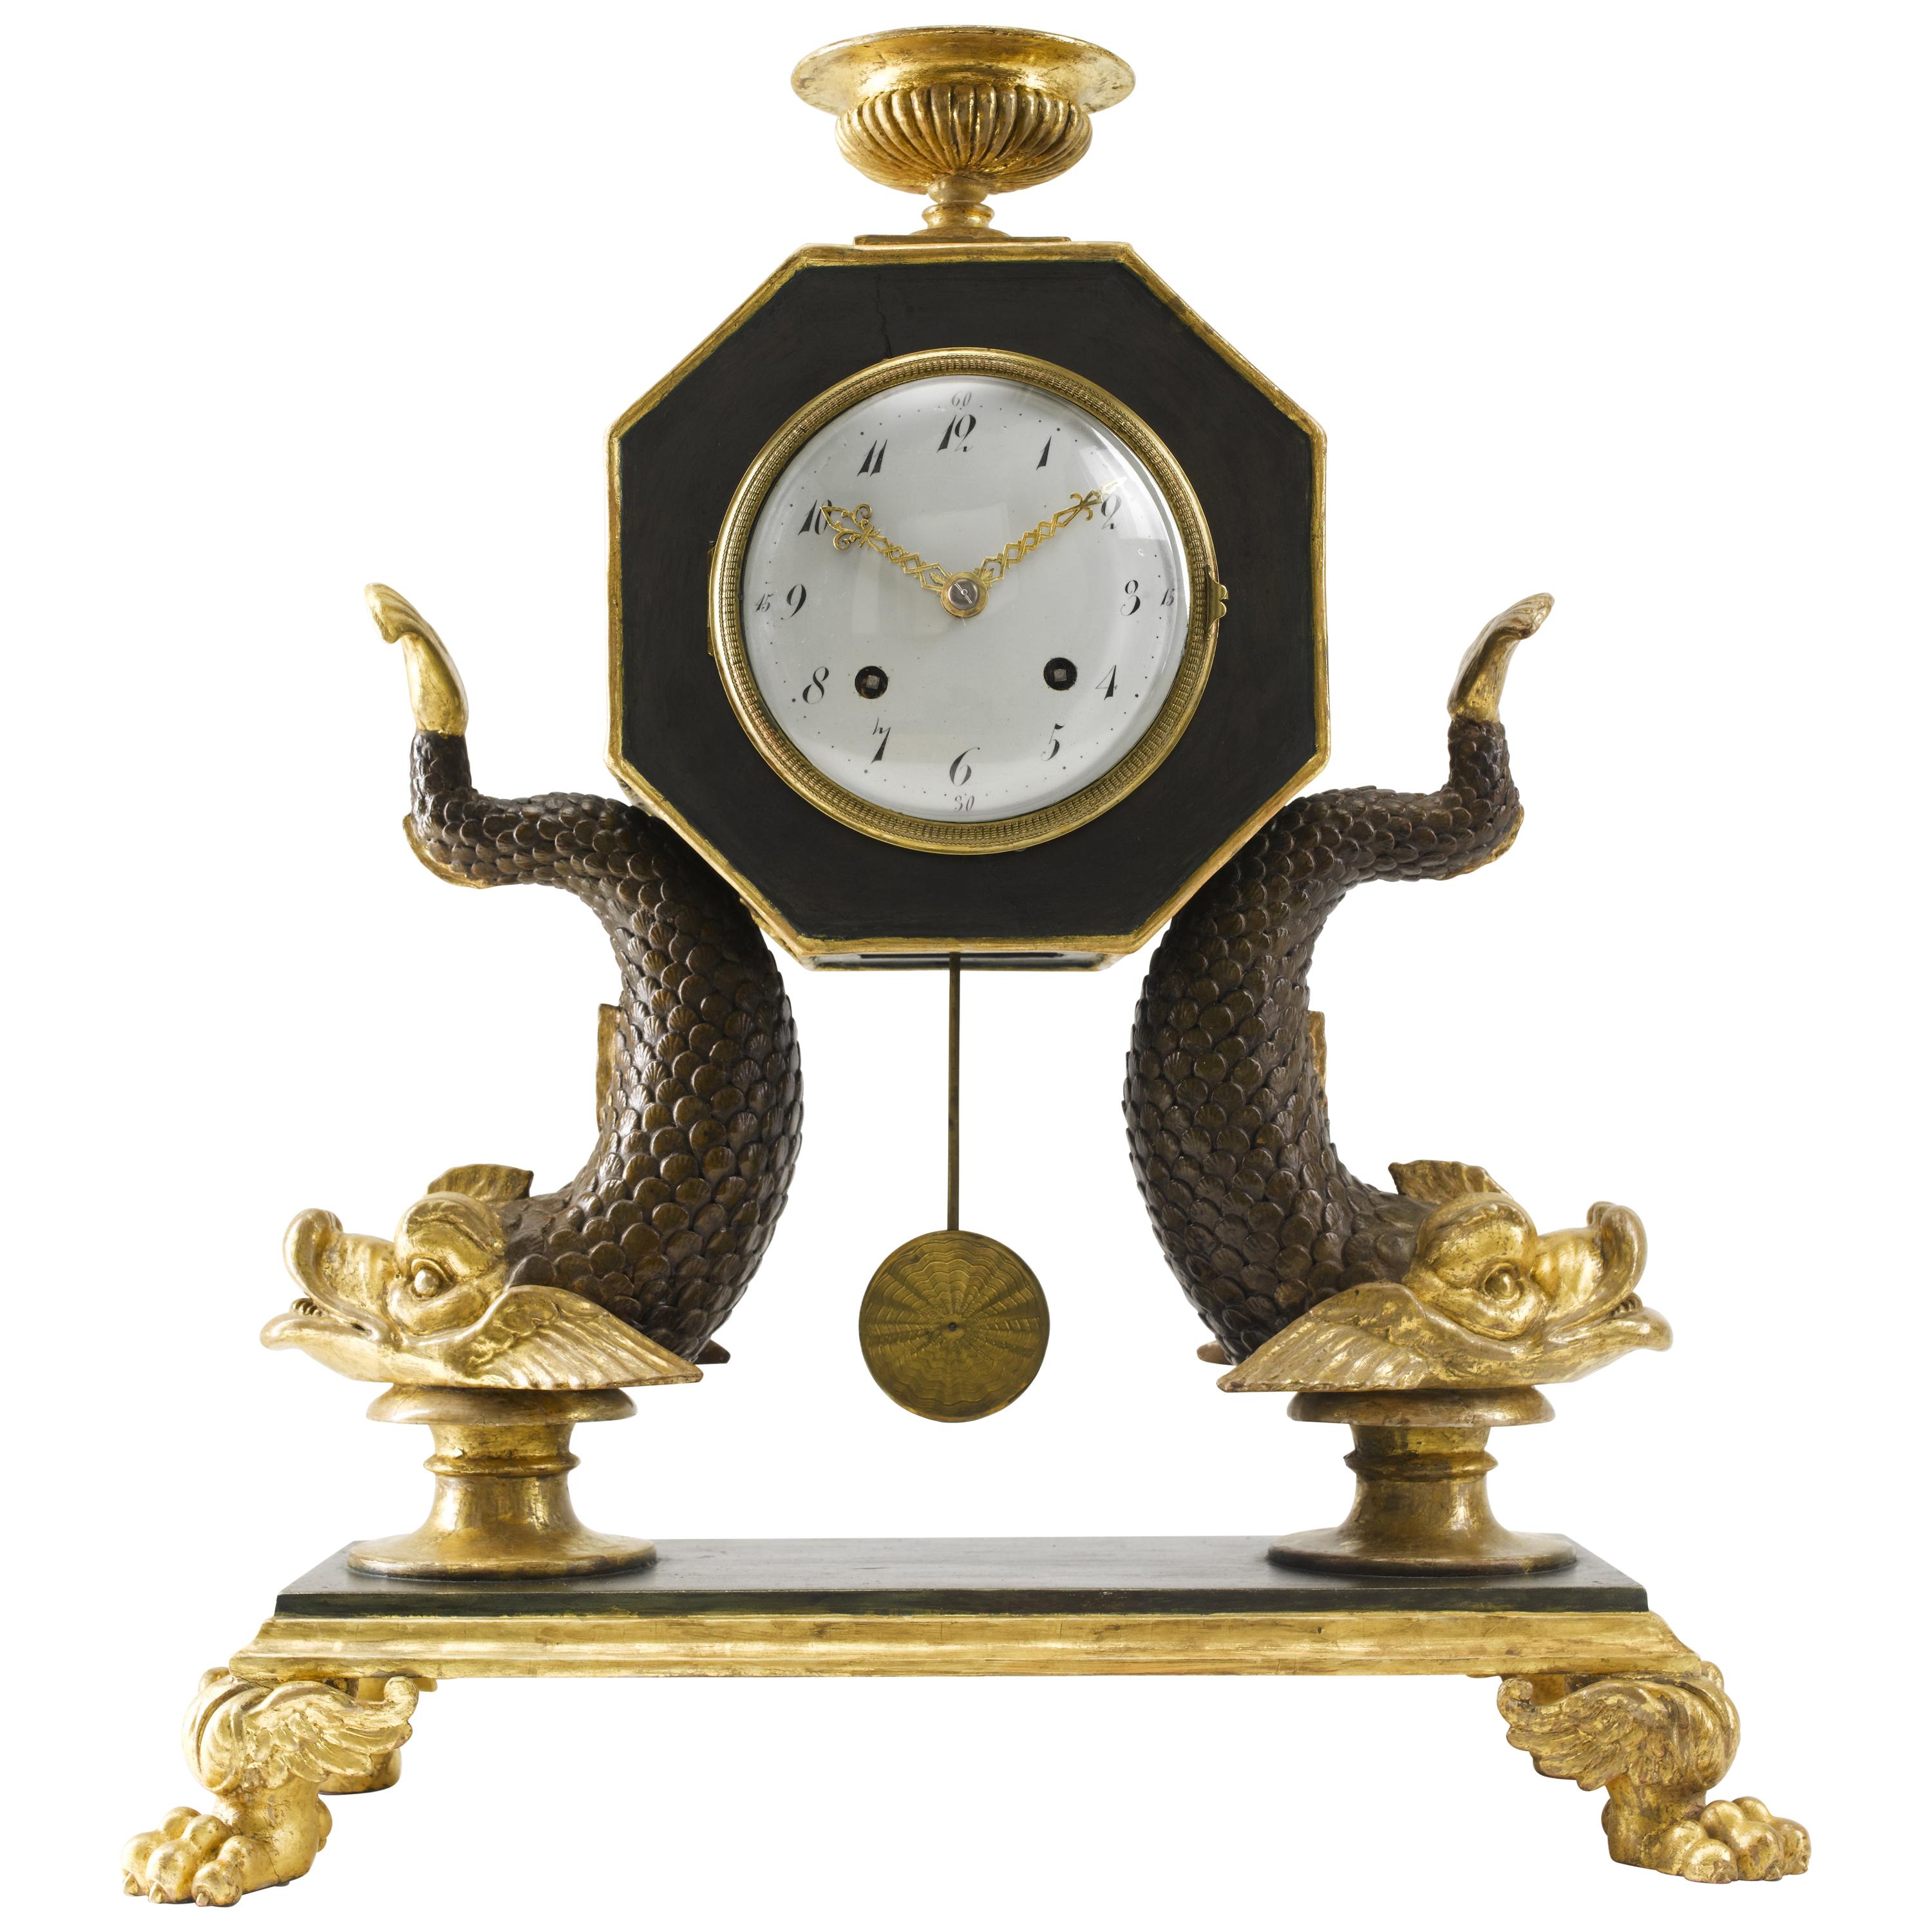 Early 19th Century Viennese Empire Carved Wood Mantel Clock